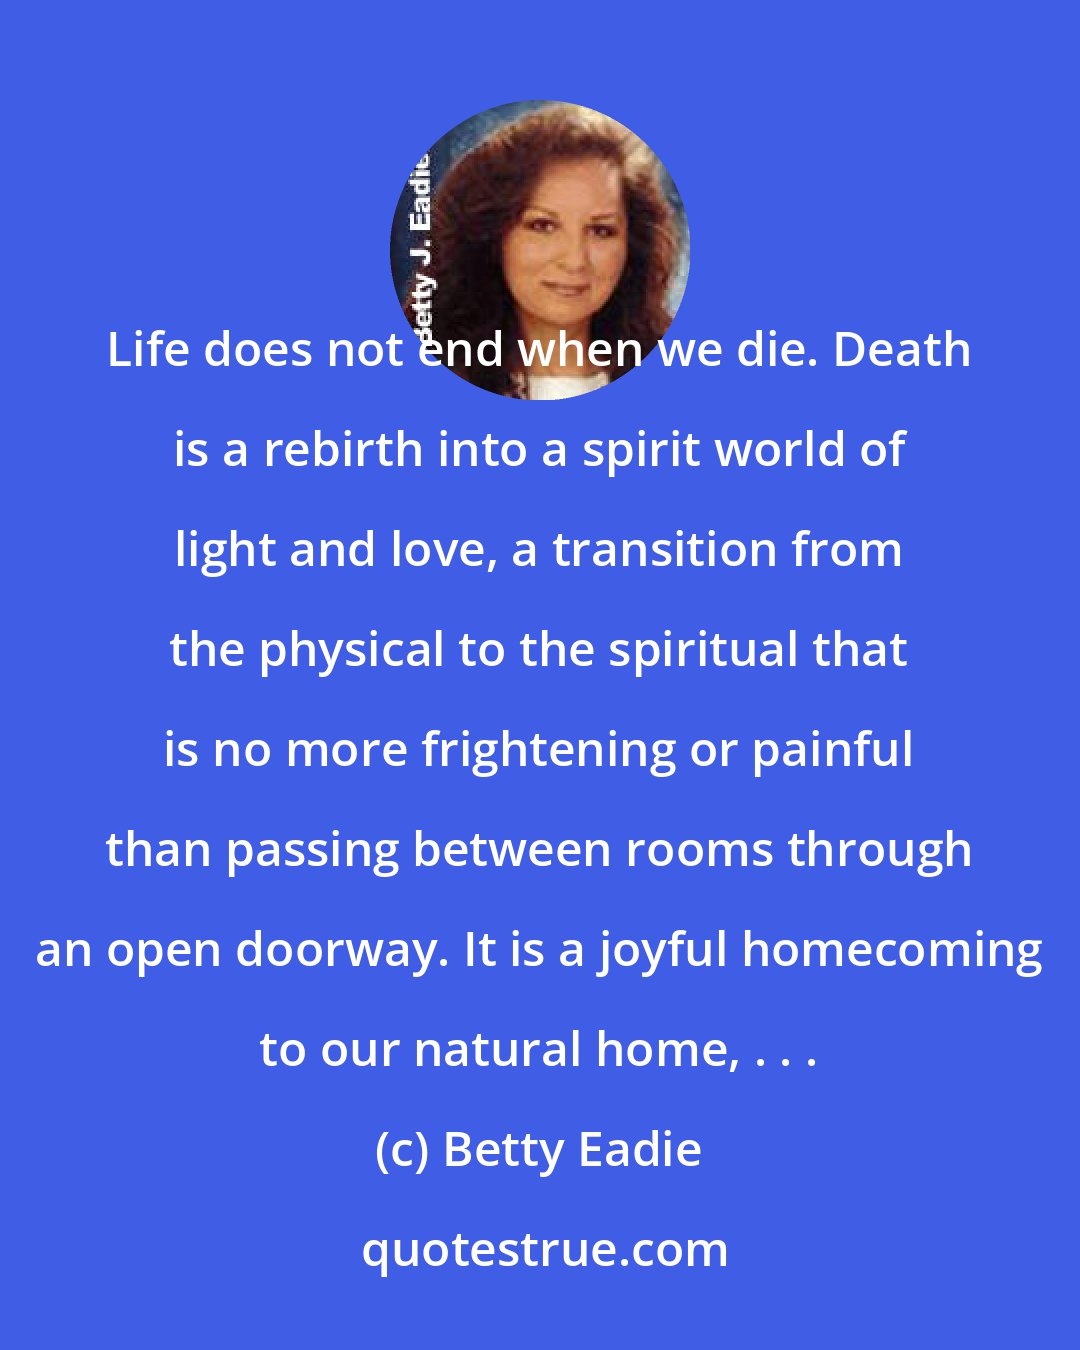 Betty Eadie: Life does not end when we die. Death is a rebirth into a spirit world of light and love, a transition from the physical to the spiritual that is no more frightening or painful than passing between rooms through an open doorway. It is a joyful homecoming to our natural home, . . .